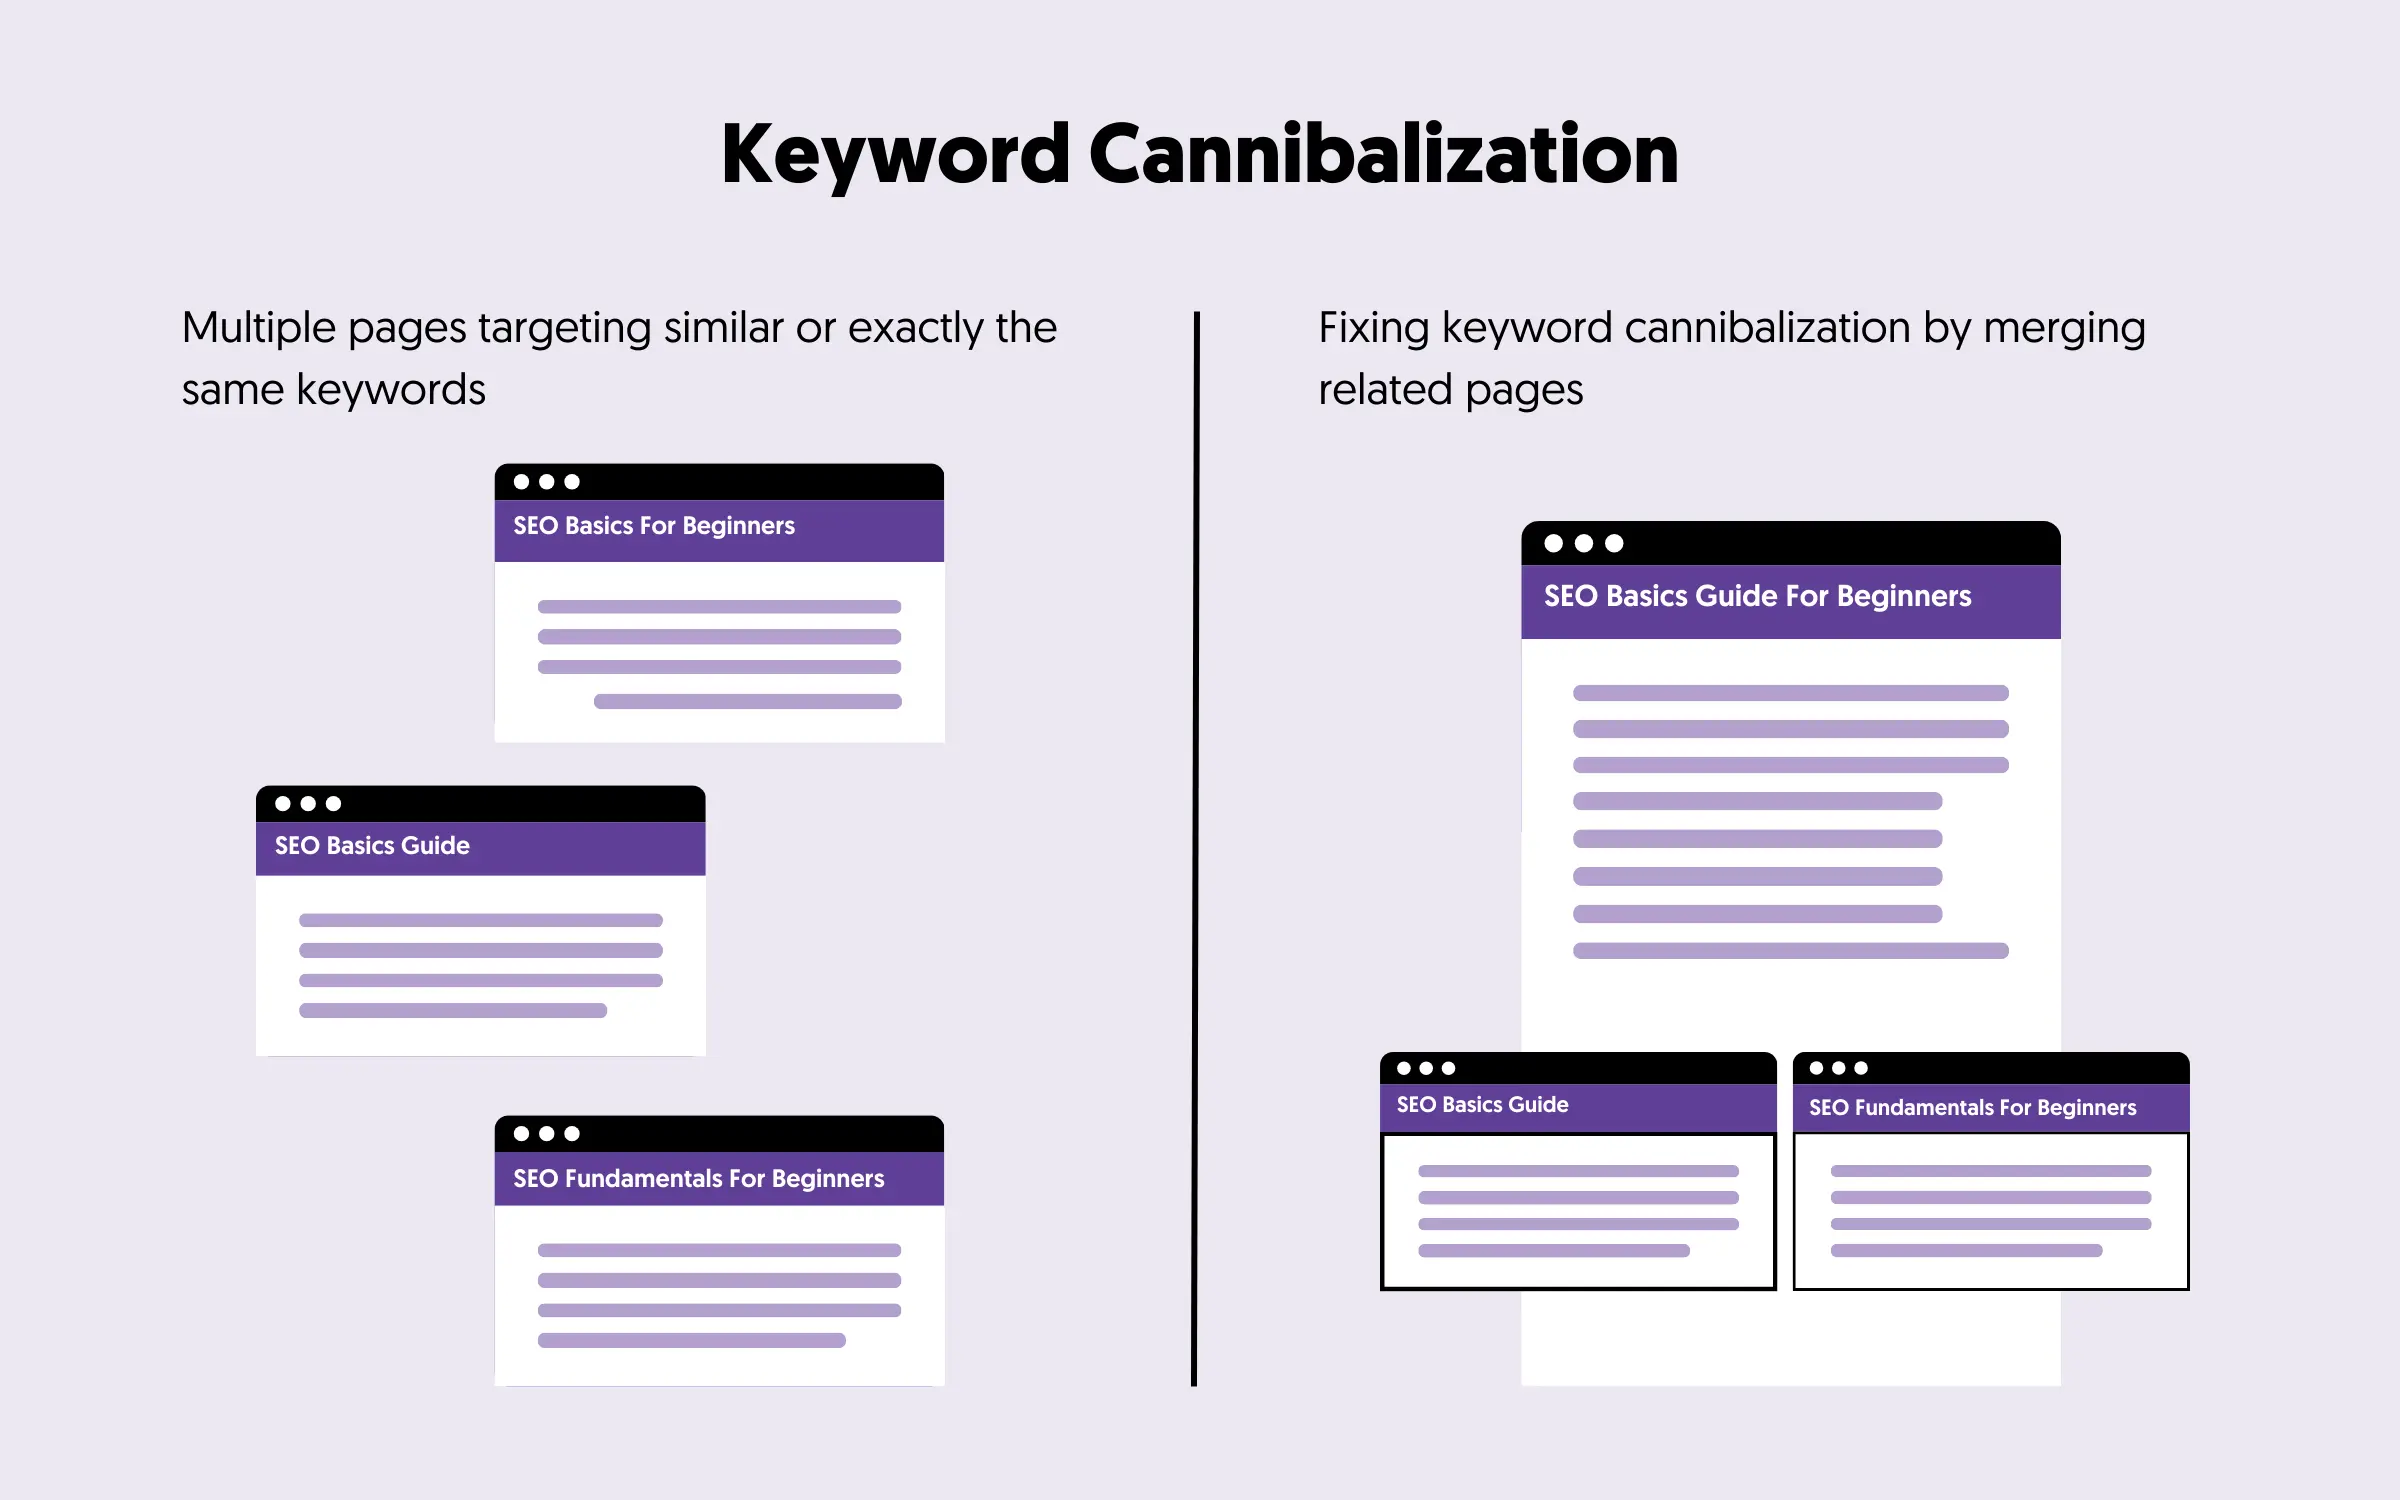 What Is Keyword Cannibalization